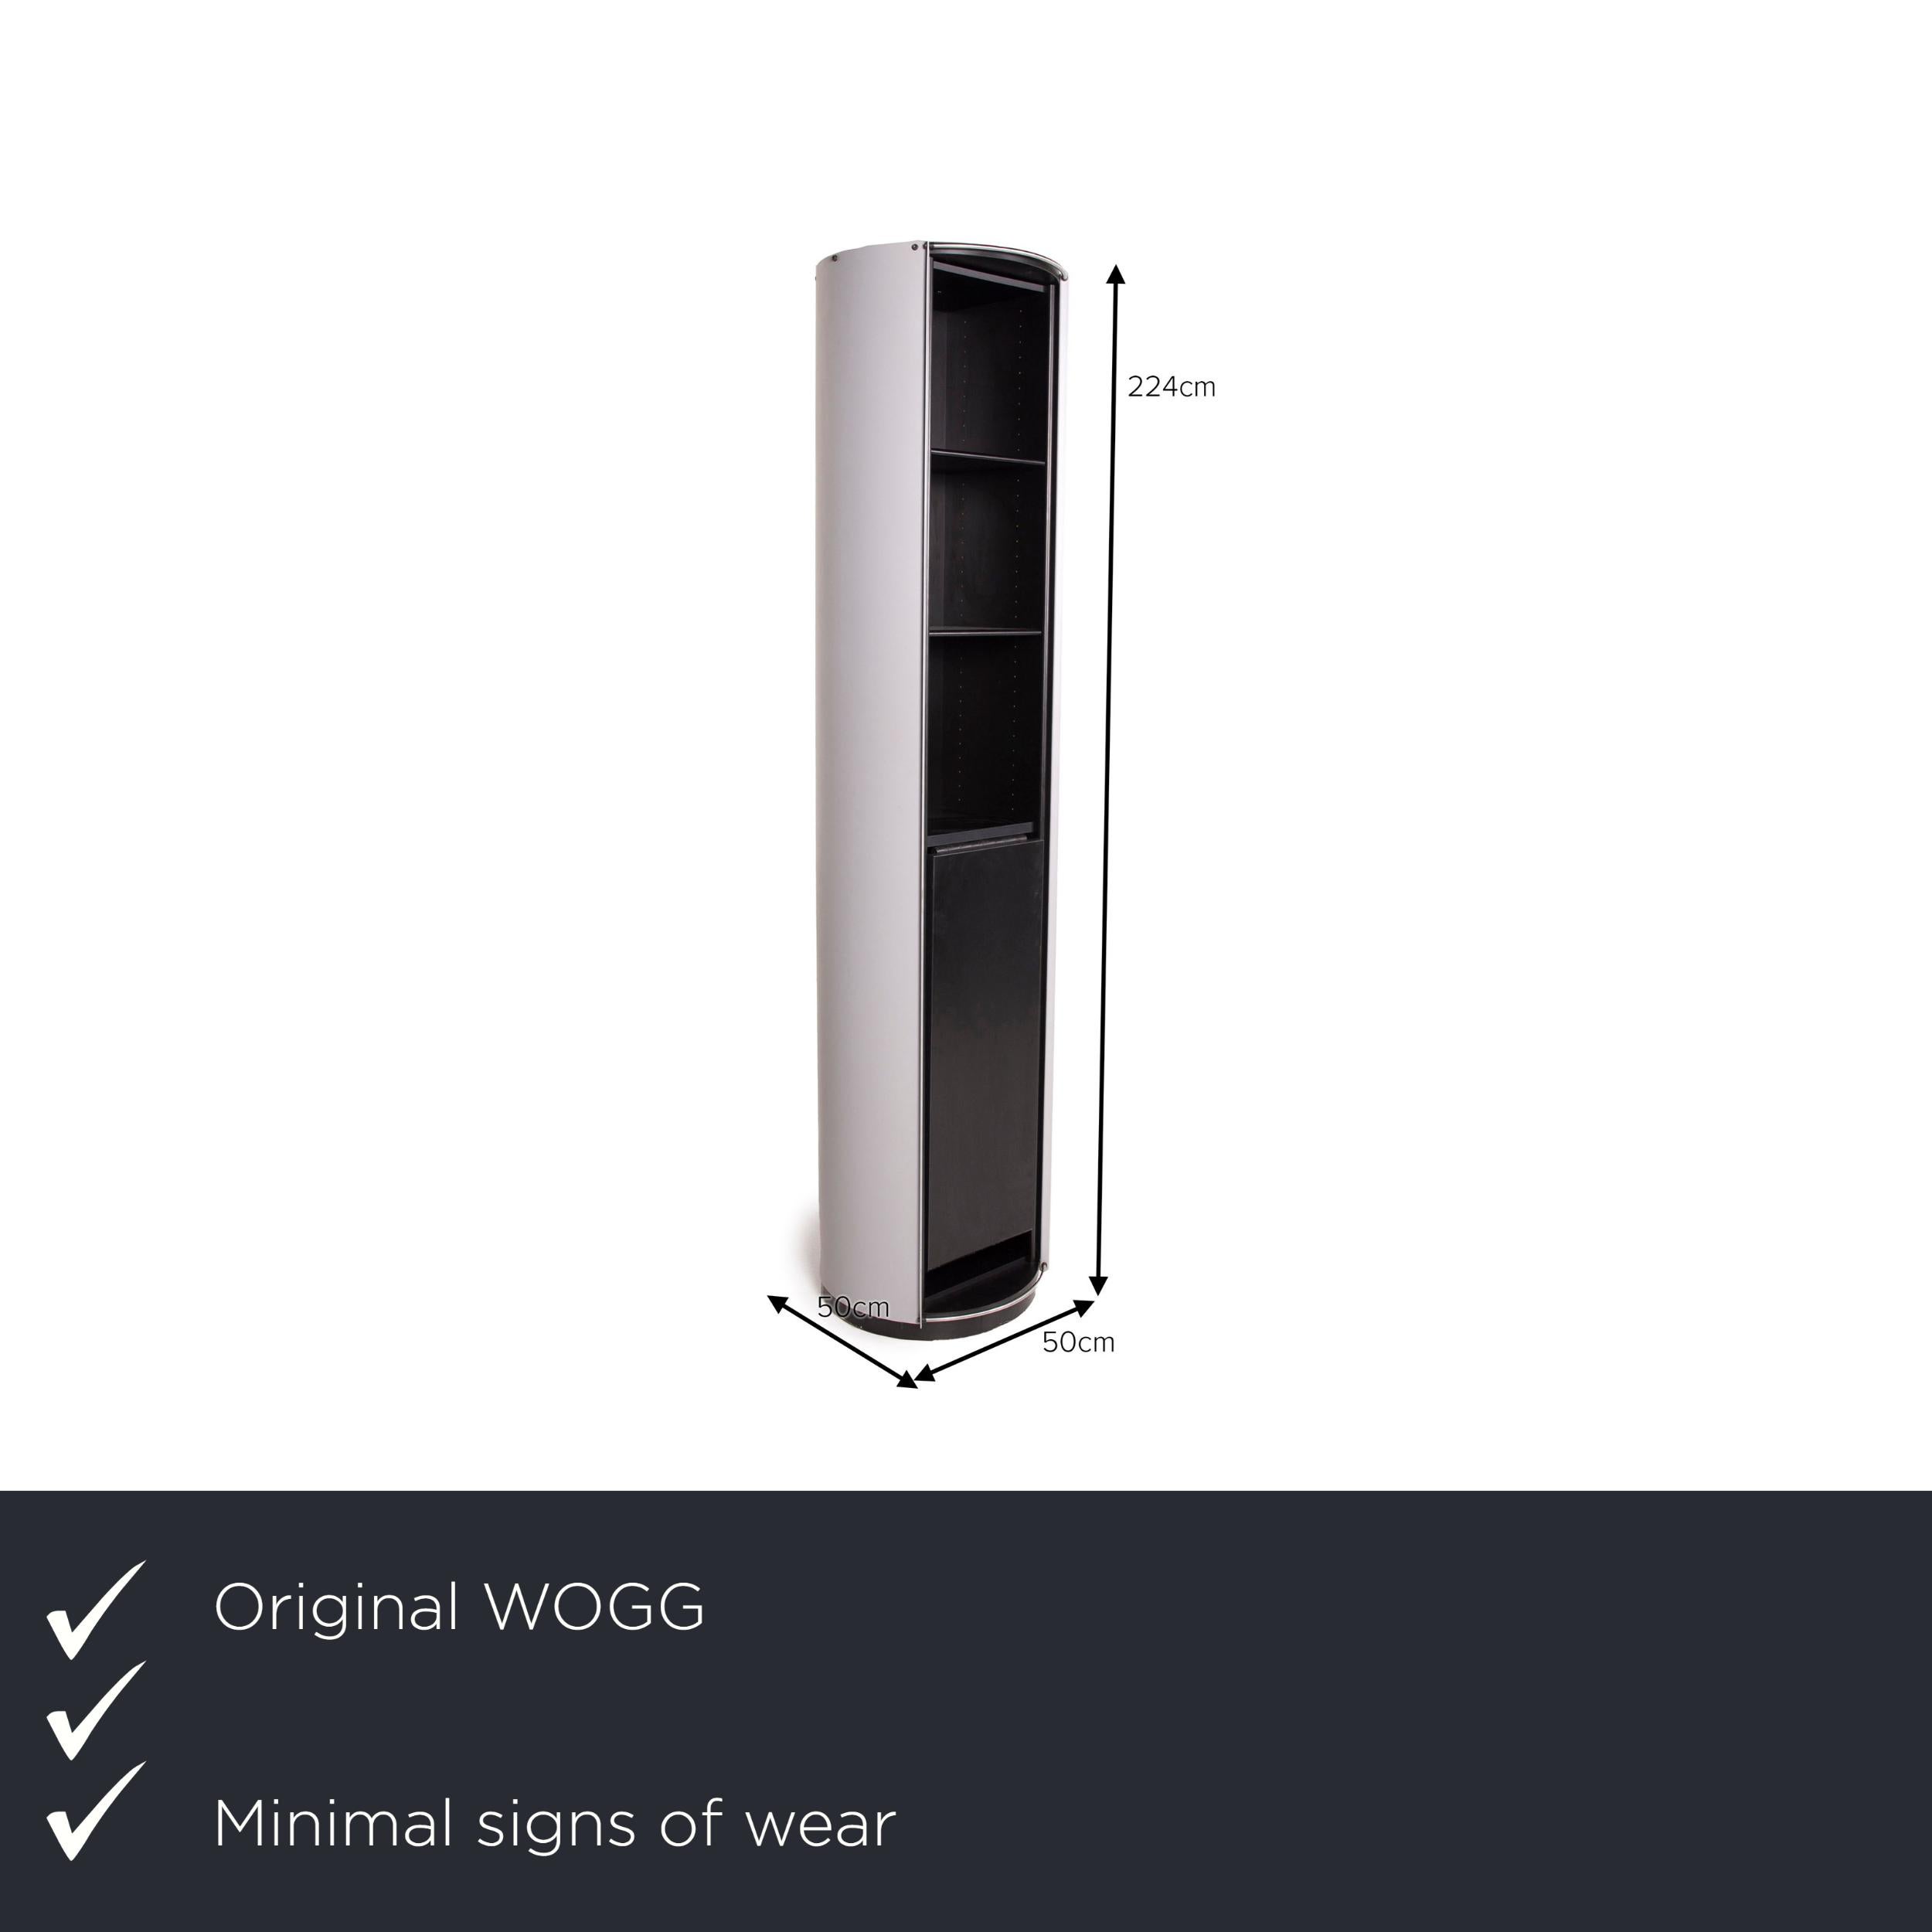 We present to you a WOGG 13 Amor metal advertising column black 5 shelves counter shelf highboard.
 
 

 Product measurements in centimeters:
 

Depth: 50
Width: 50
Height: 224.
 
 
   
   
 